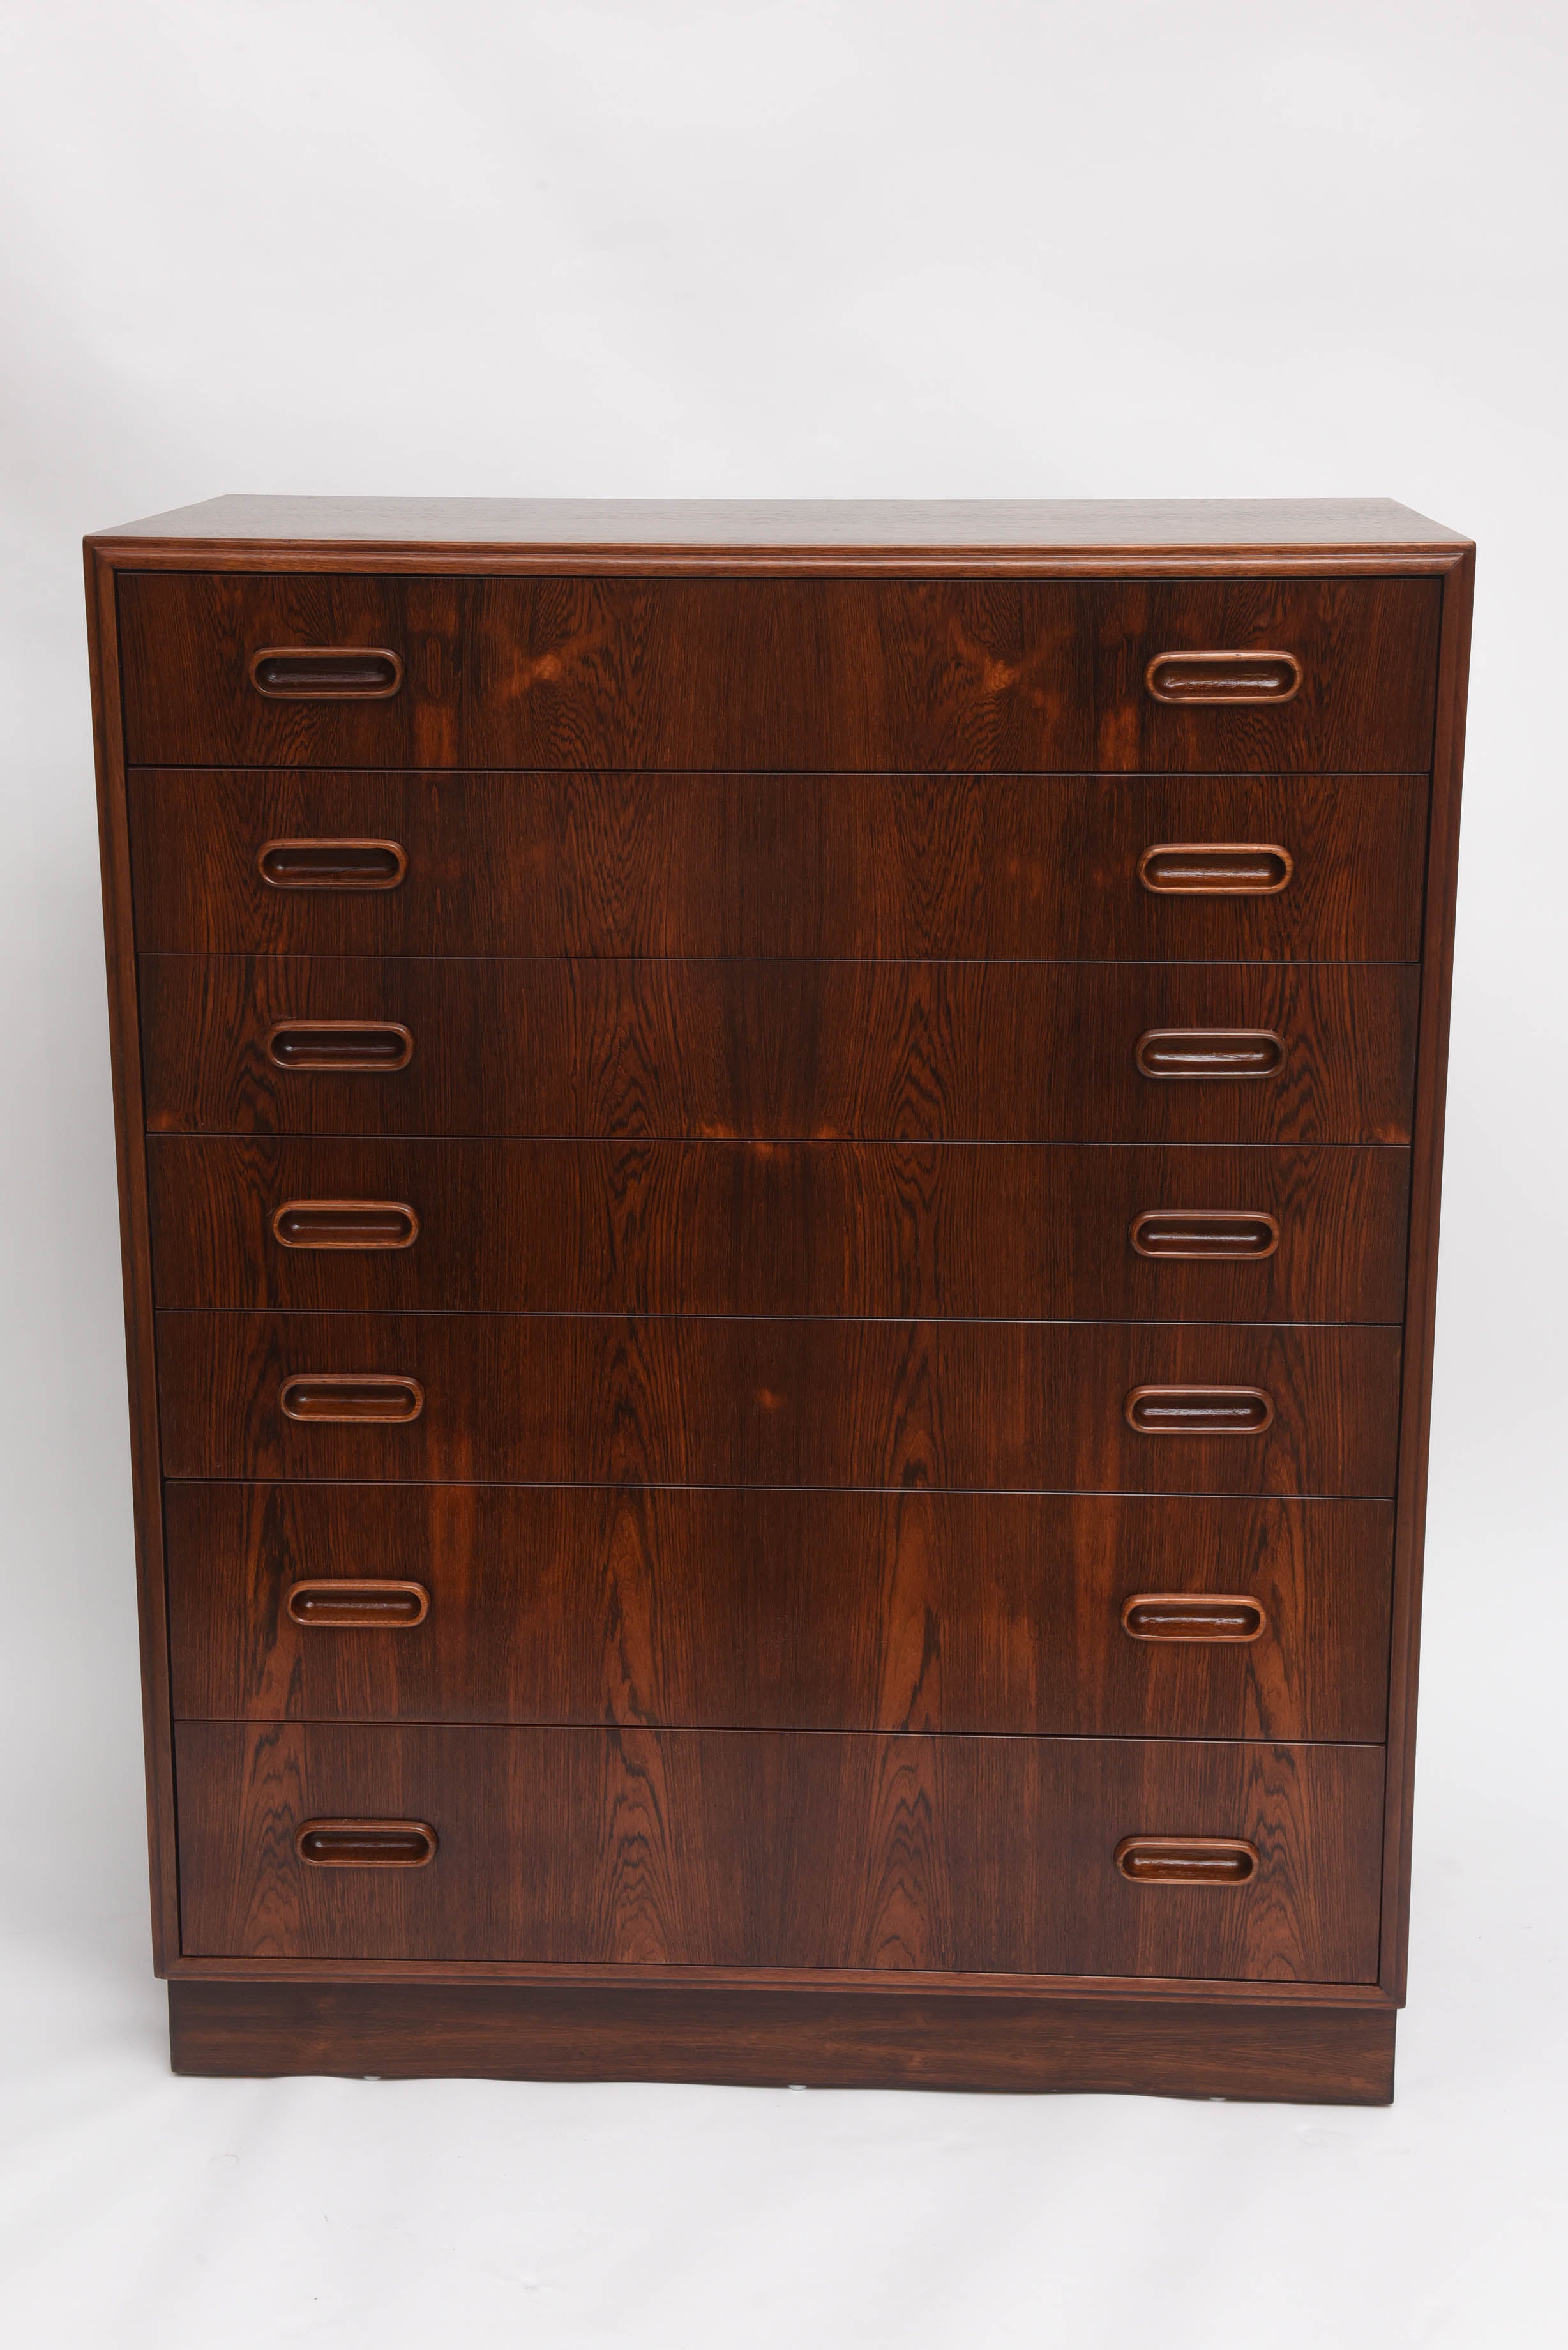 Beautifully restored Danish rosewood tall dresser with integrated wood handles.